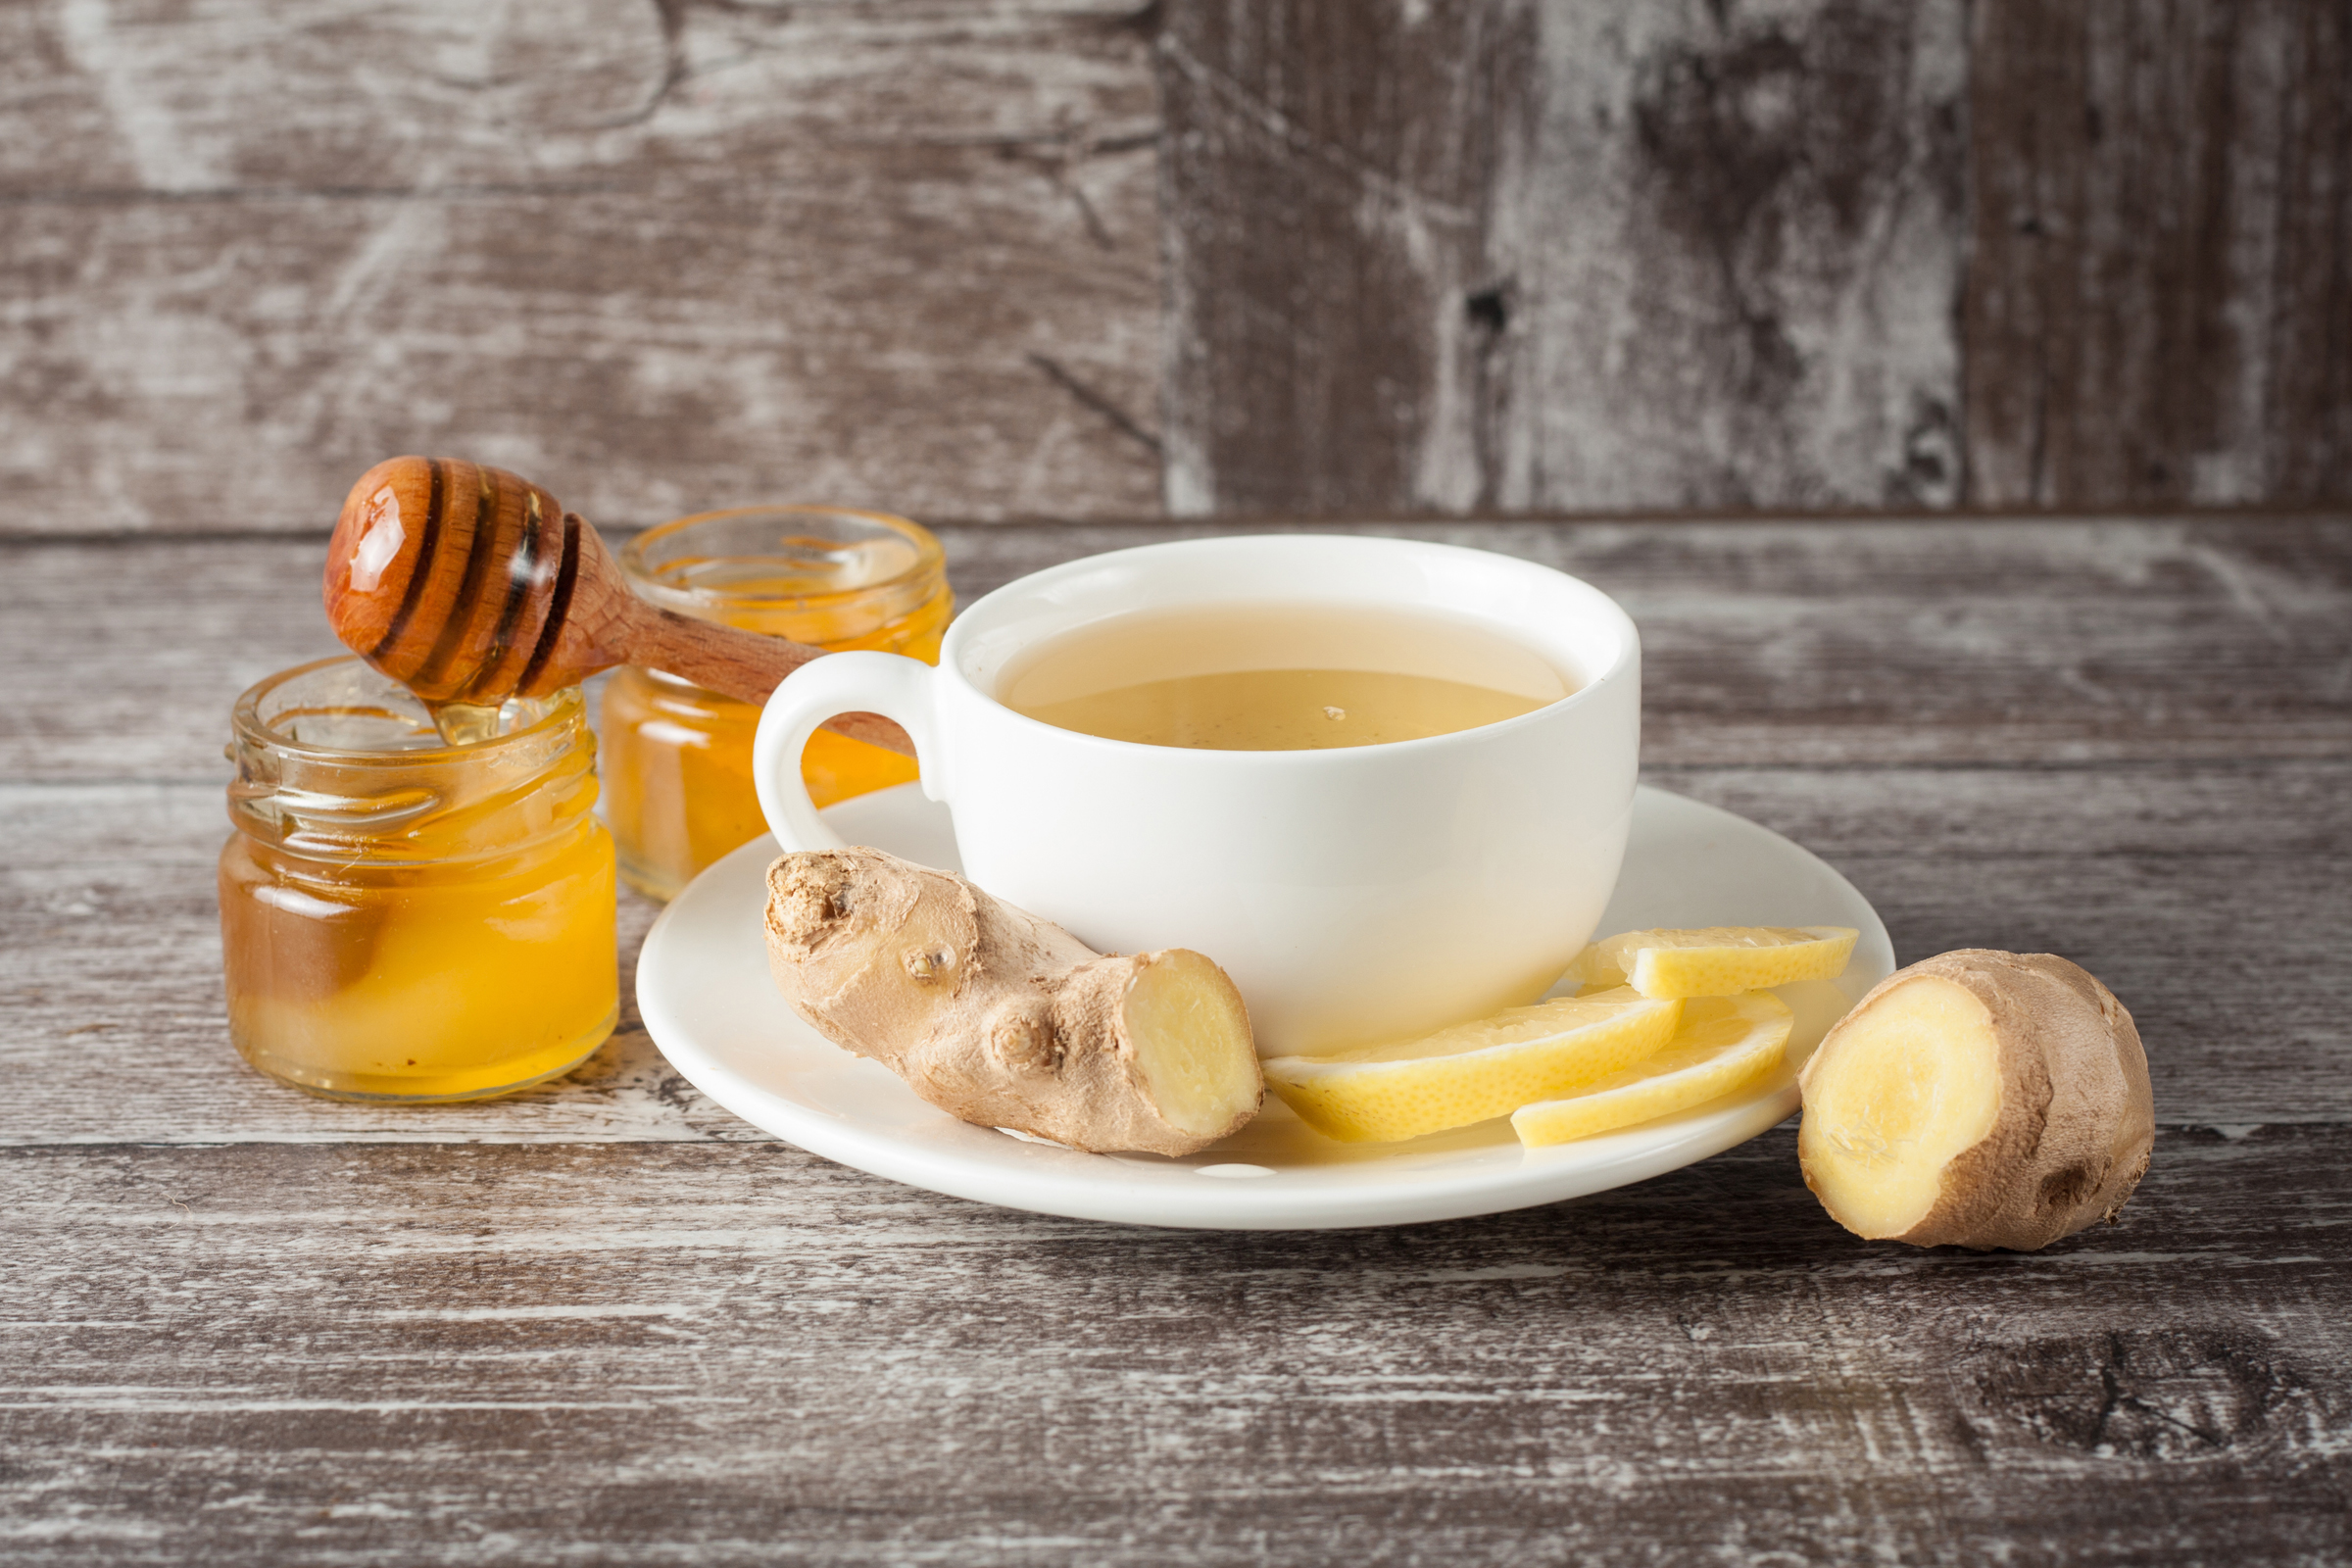 http://www.shutterstock.com/pic-332345660/stock-photo-a-white-cup-of-green-natural-tea-with-ginger-lemon-and-honey-on-wooden-rustic-background-healthy.html?src=UvaLLrjuu8mbTnIYccf9dQ-1-7